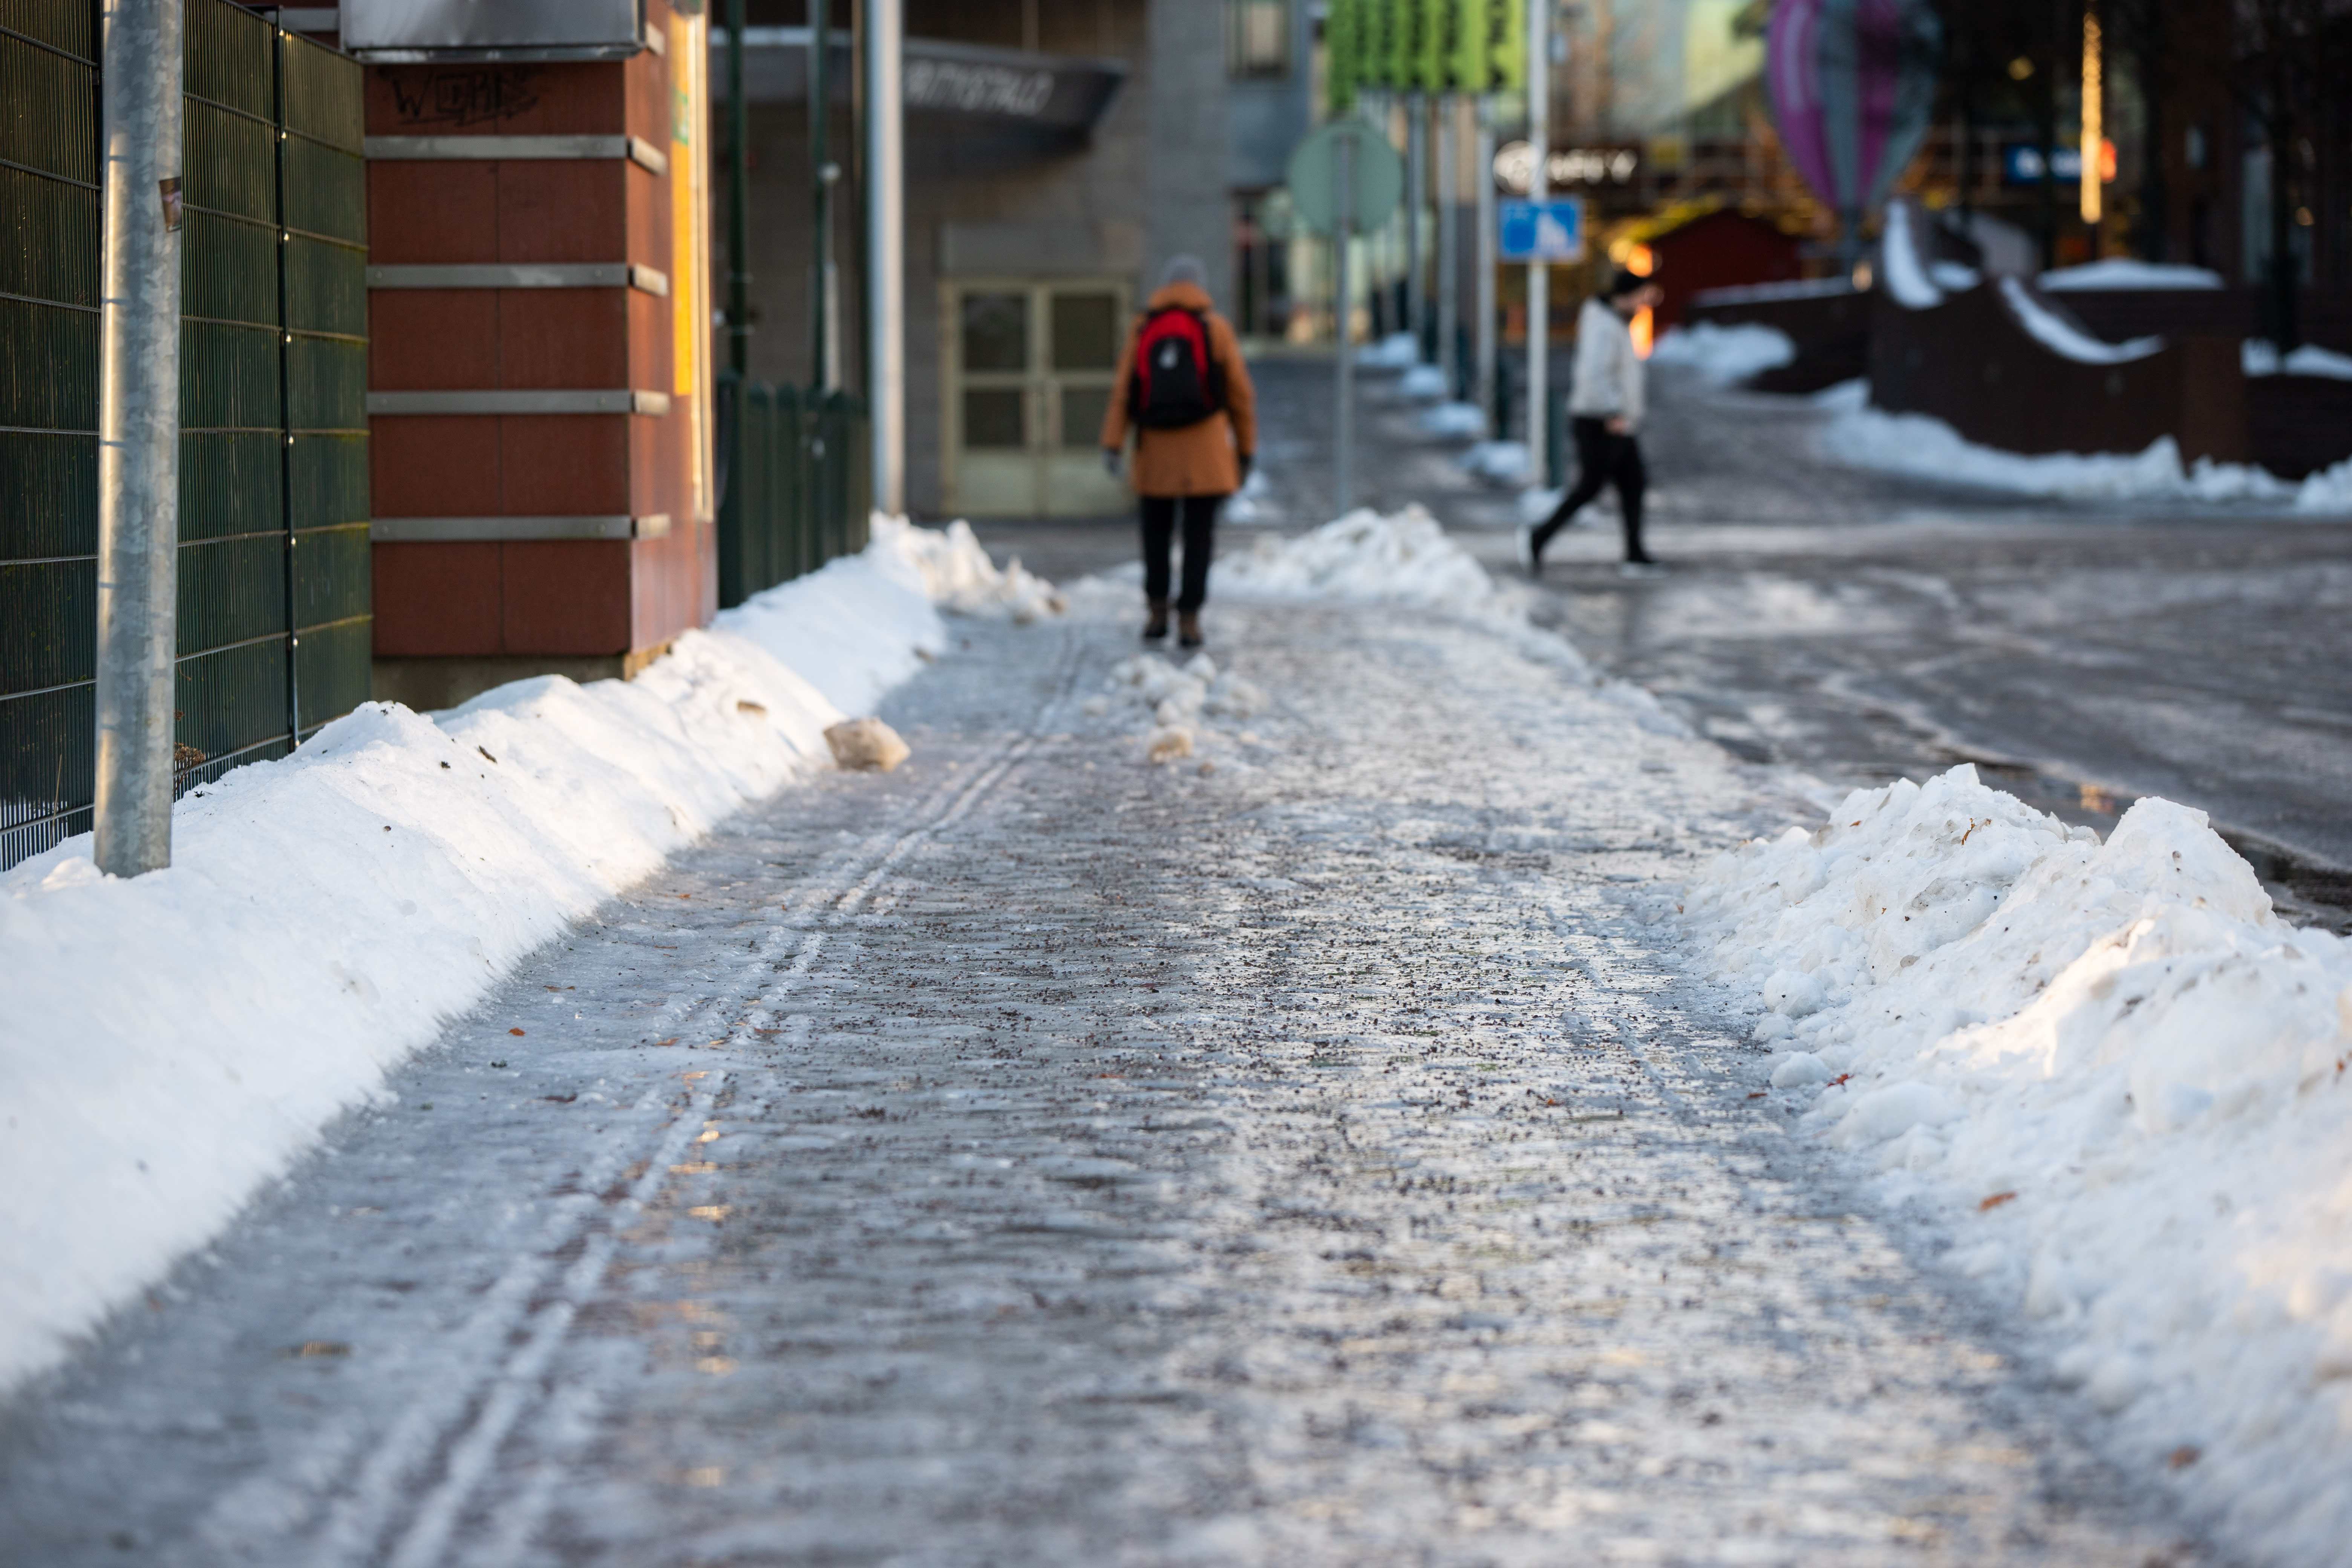 In commuter traffic, fall injuries increase when the capital freezes and the sidewalks become slippery